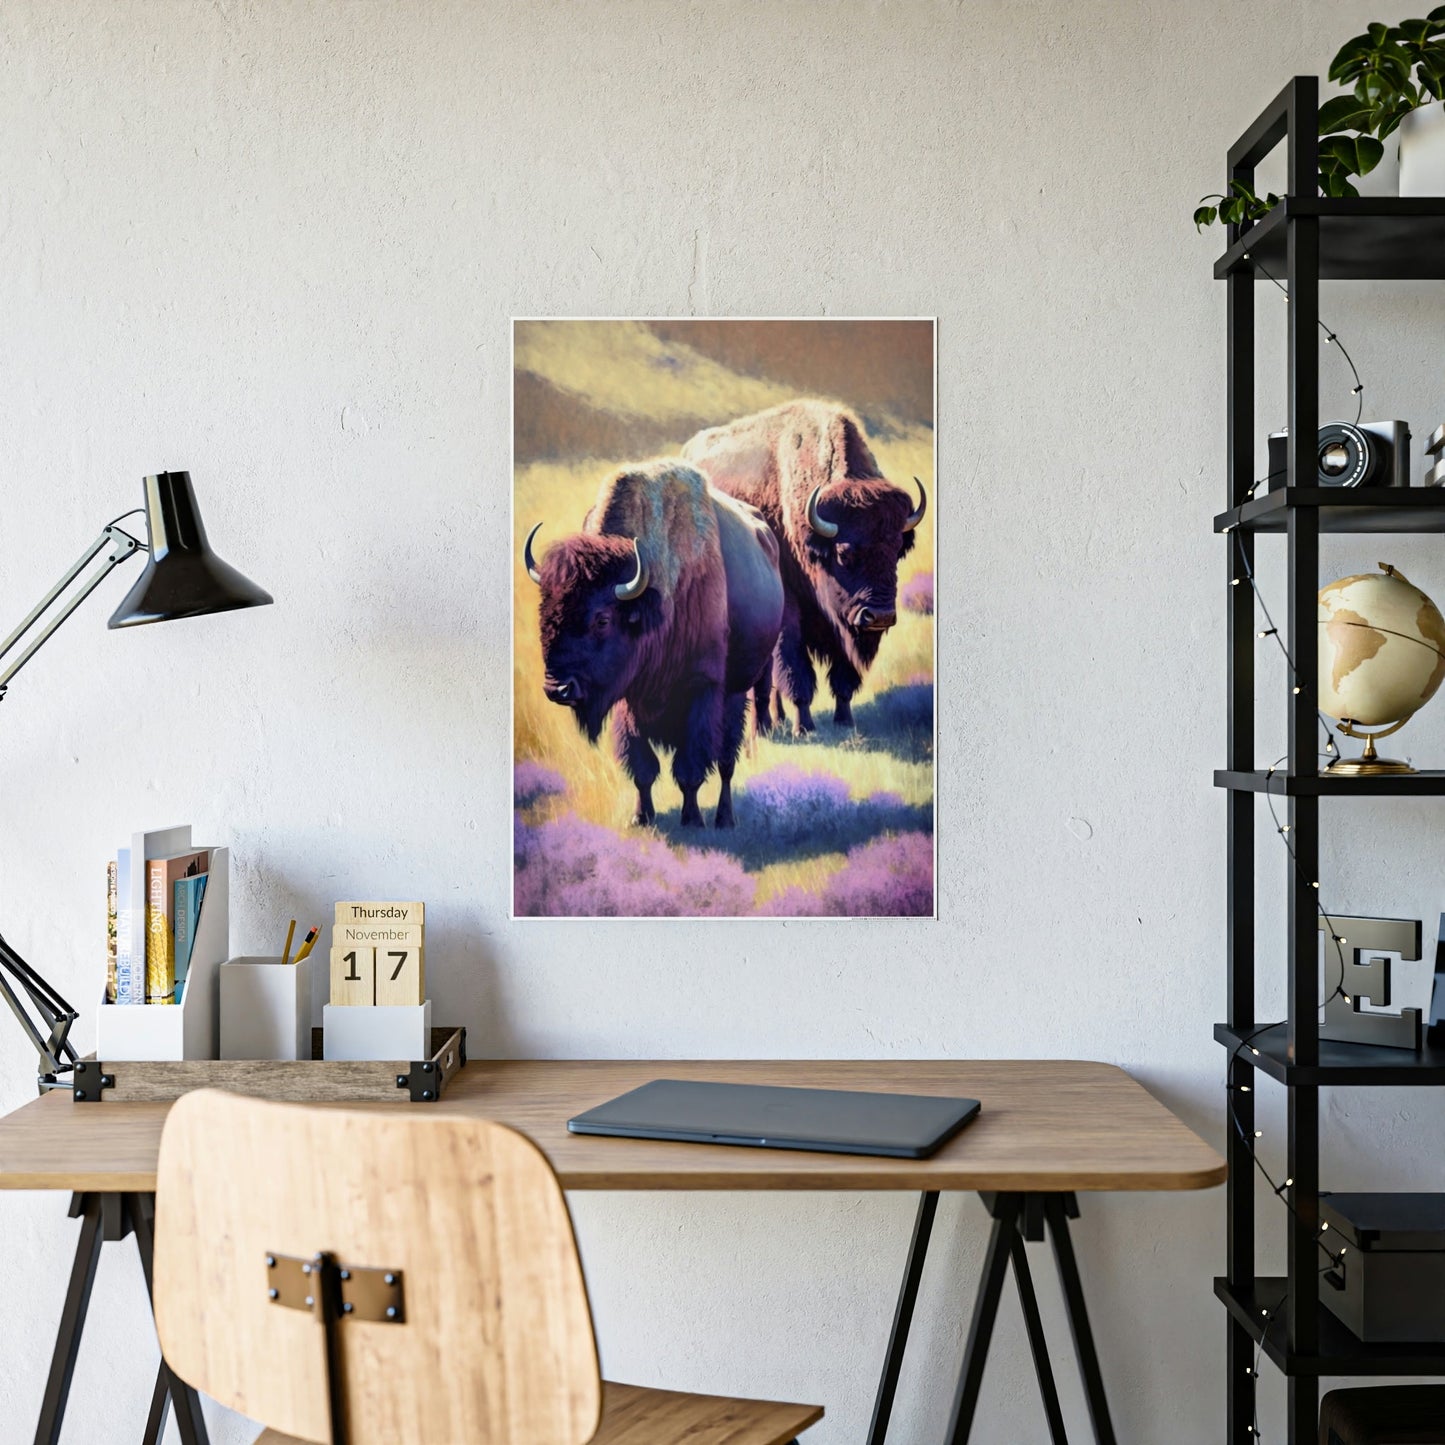 The Bison's Strength: Canvas & Poster Wall Art of a Bisons Displaying Its Might